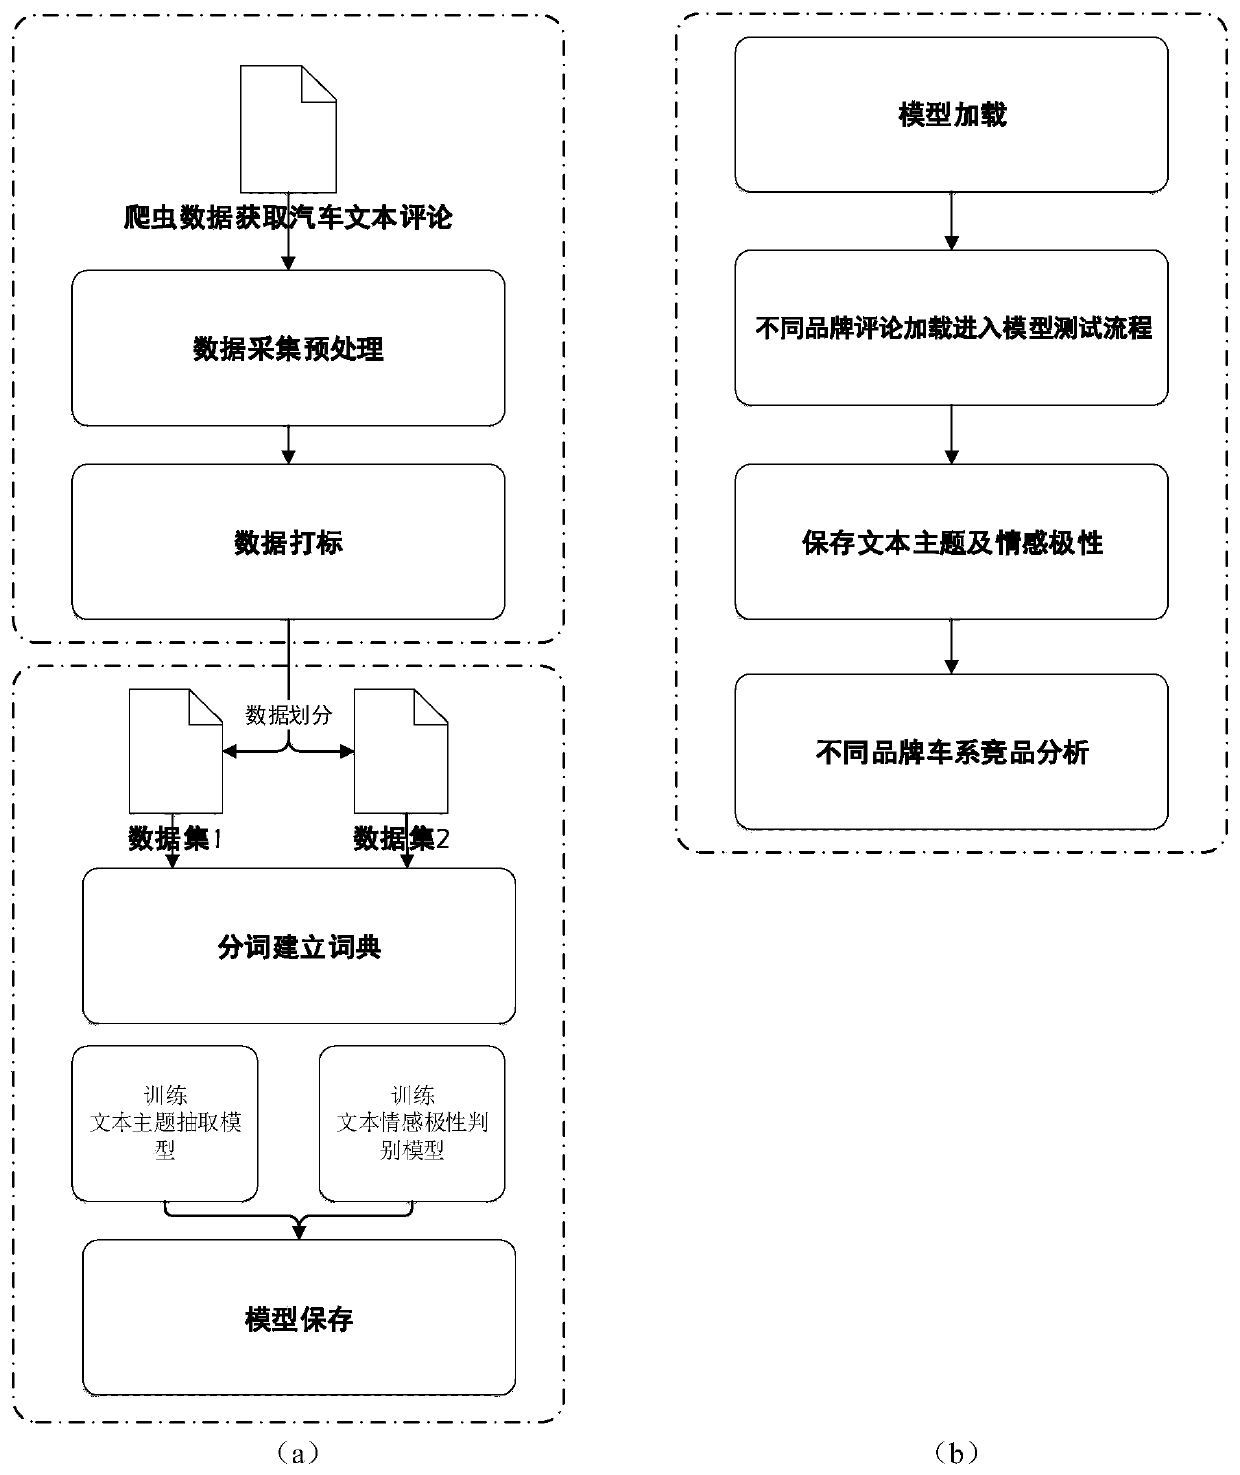 Automobile competitive product comparison method based on viewpoint mining analysis